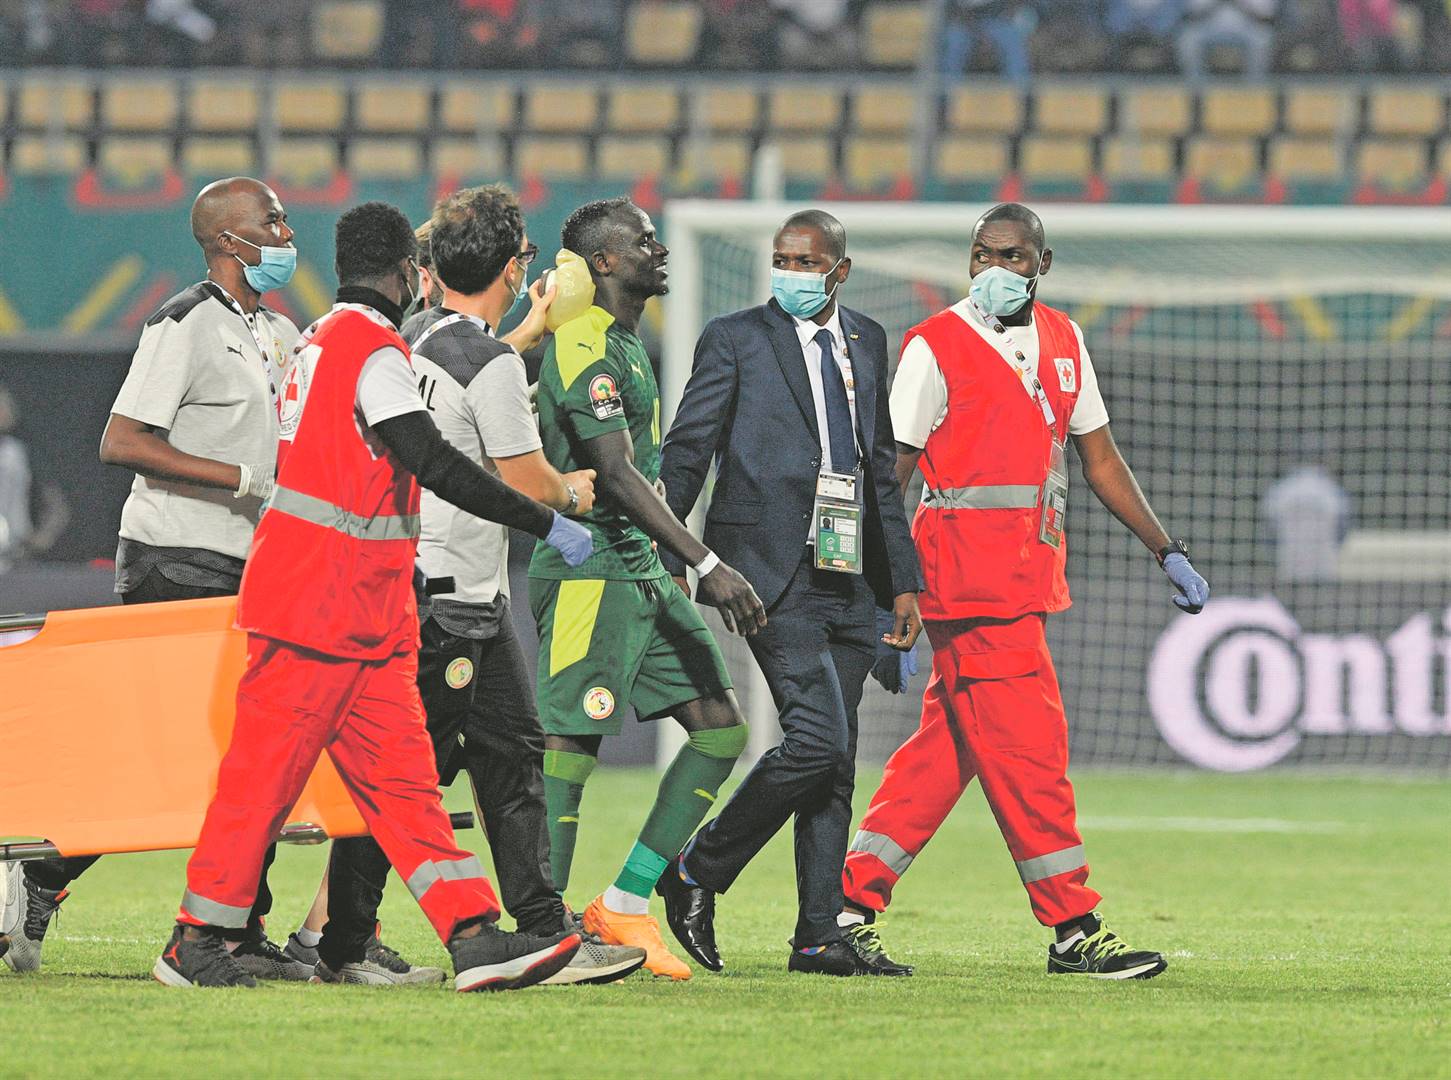 Thulani Ngwenya (in black suit) stopped play during an Afcon game between Senegal and Cape Verde to attend to Sadio Mané’s head injury. Photo: Sydney Mahlangu/BackpagePix